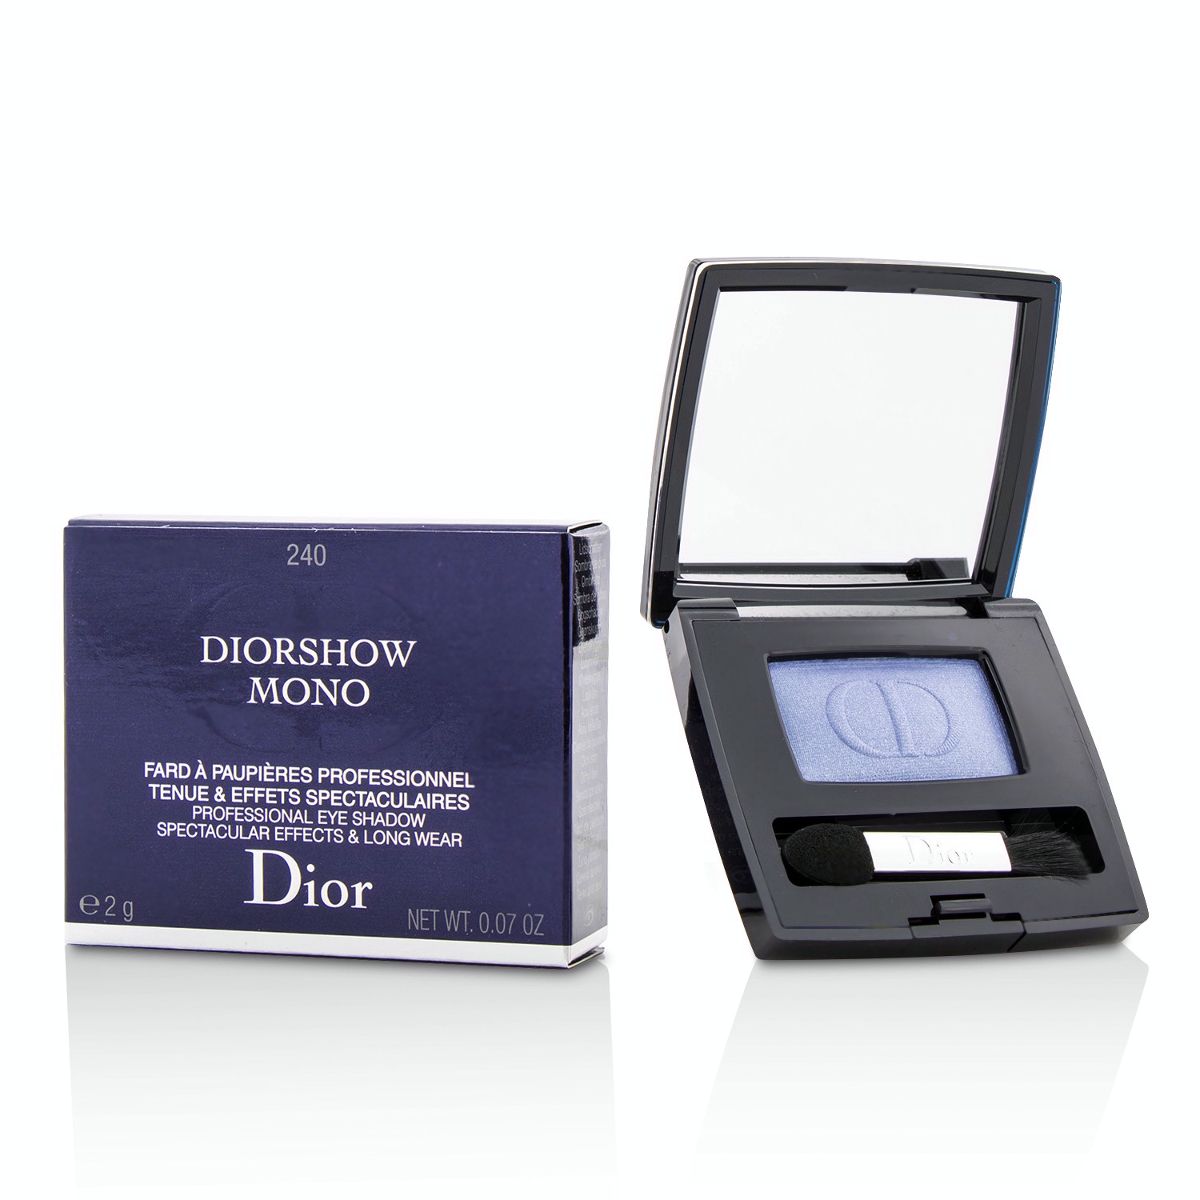 Diorshow Mono Professional Spectacular Effects  Long Wear Eyeshadow - # 240 Air Christian Dior Image